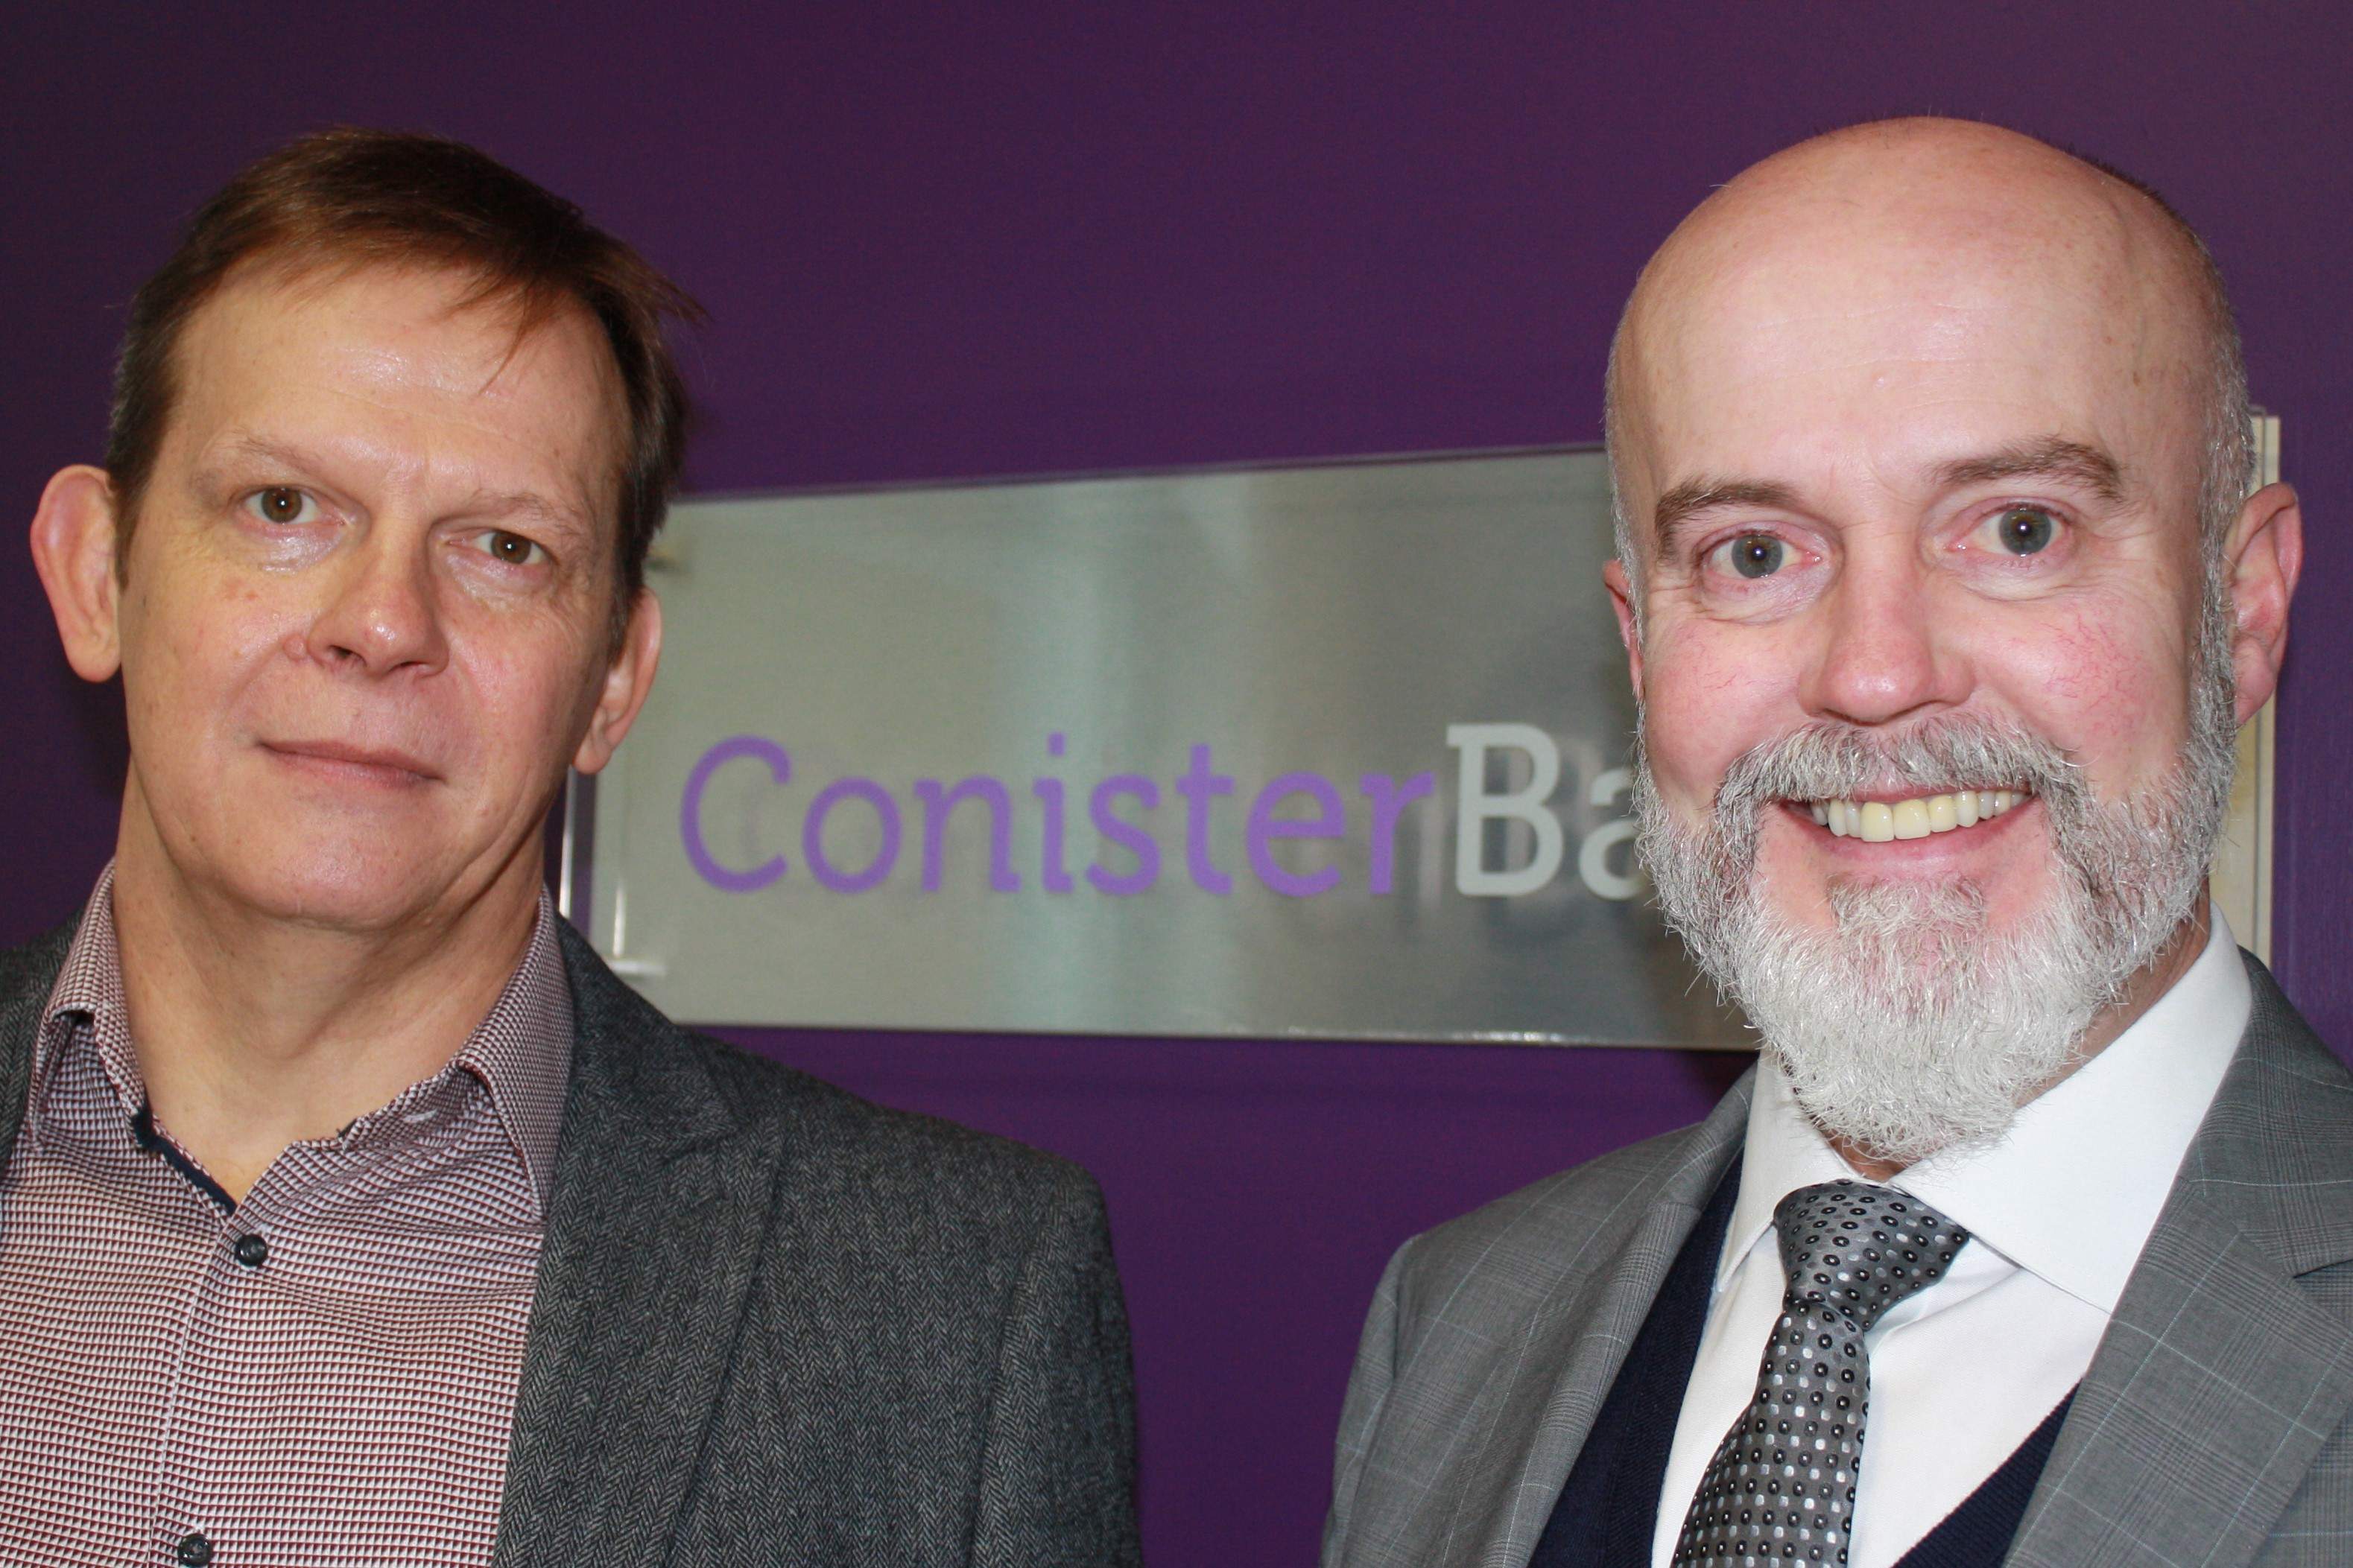 Conister owner Manx acquires broker in £4m deal